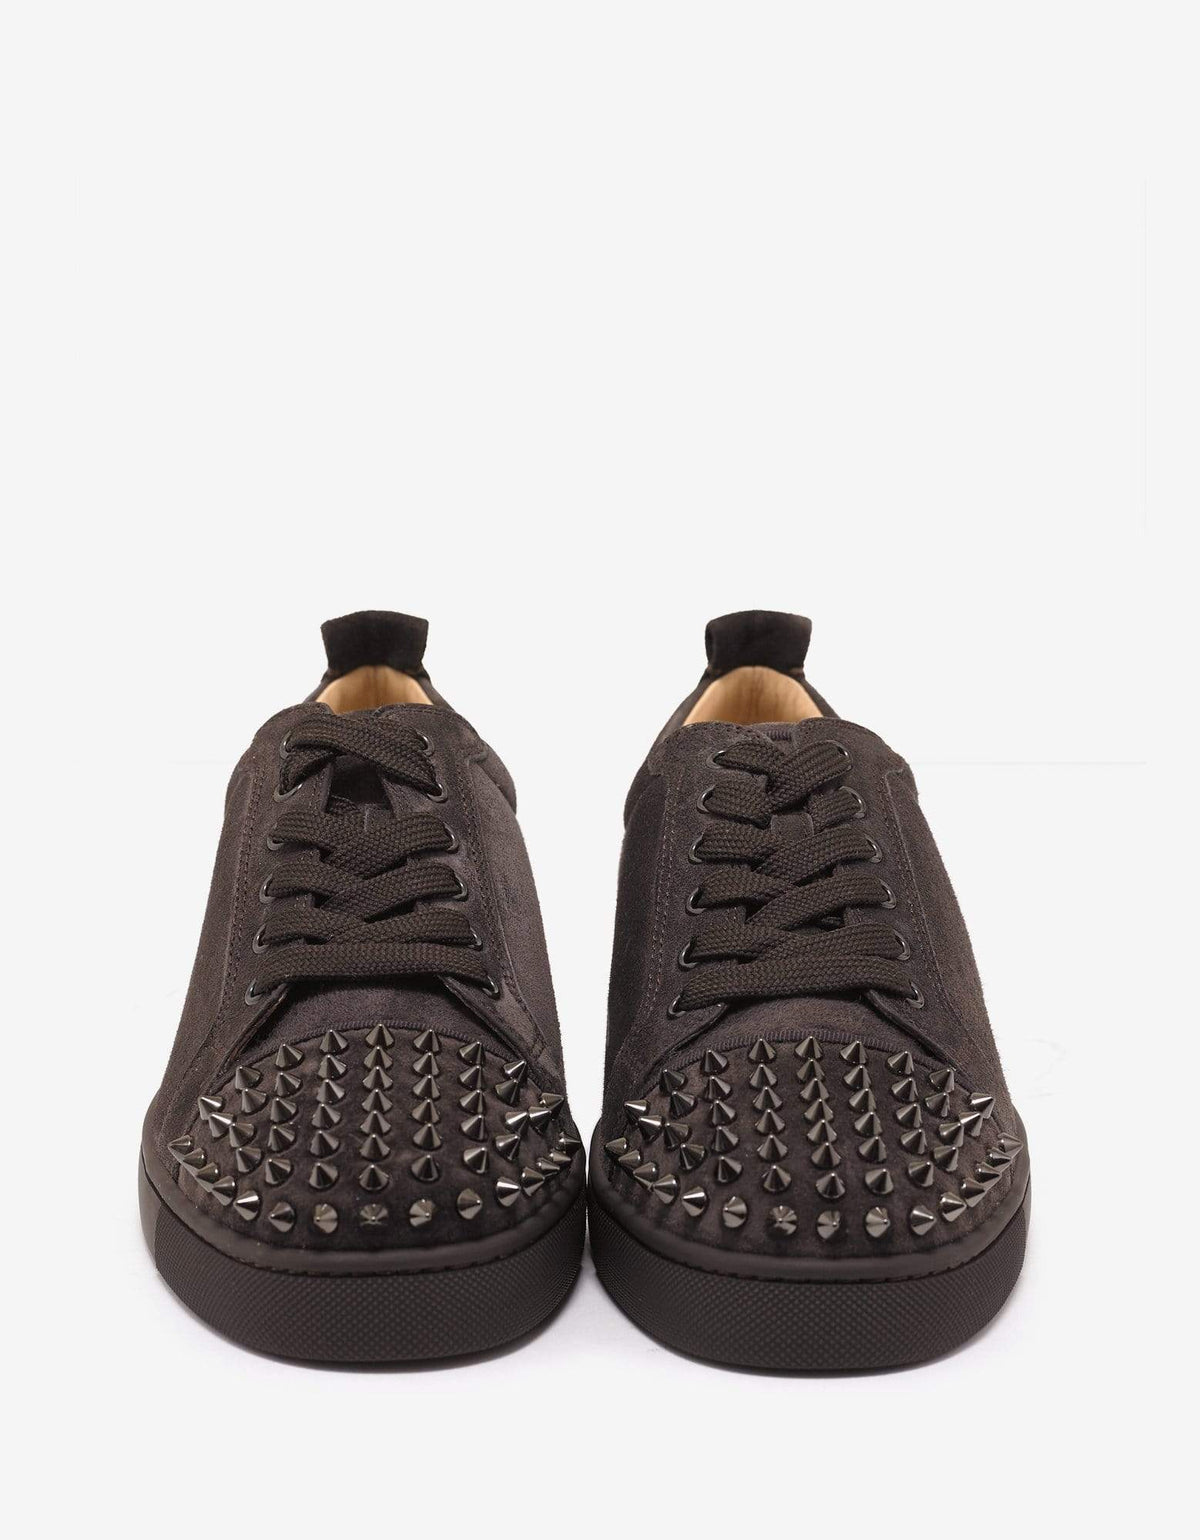 Christian Louboutin Louis Junior Spikes Flat Réglisse Brown Suede Trainers